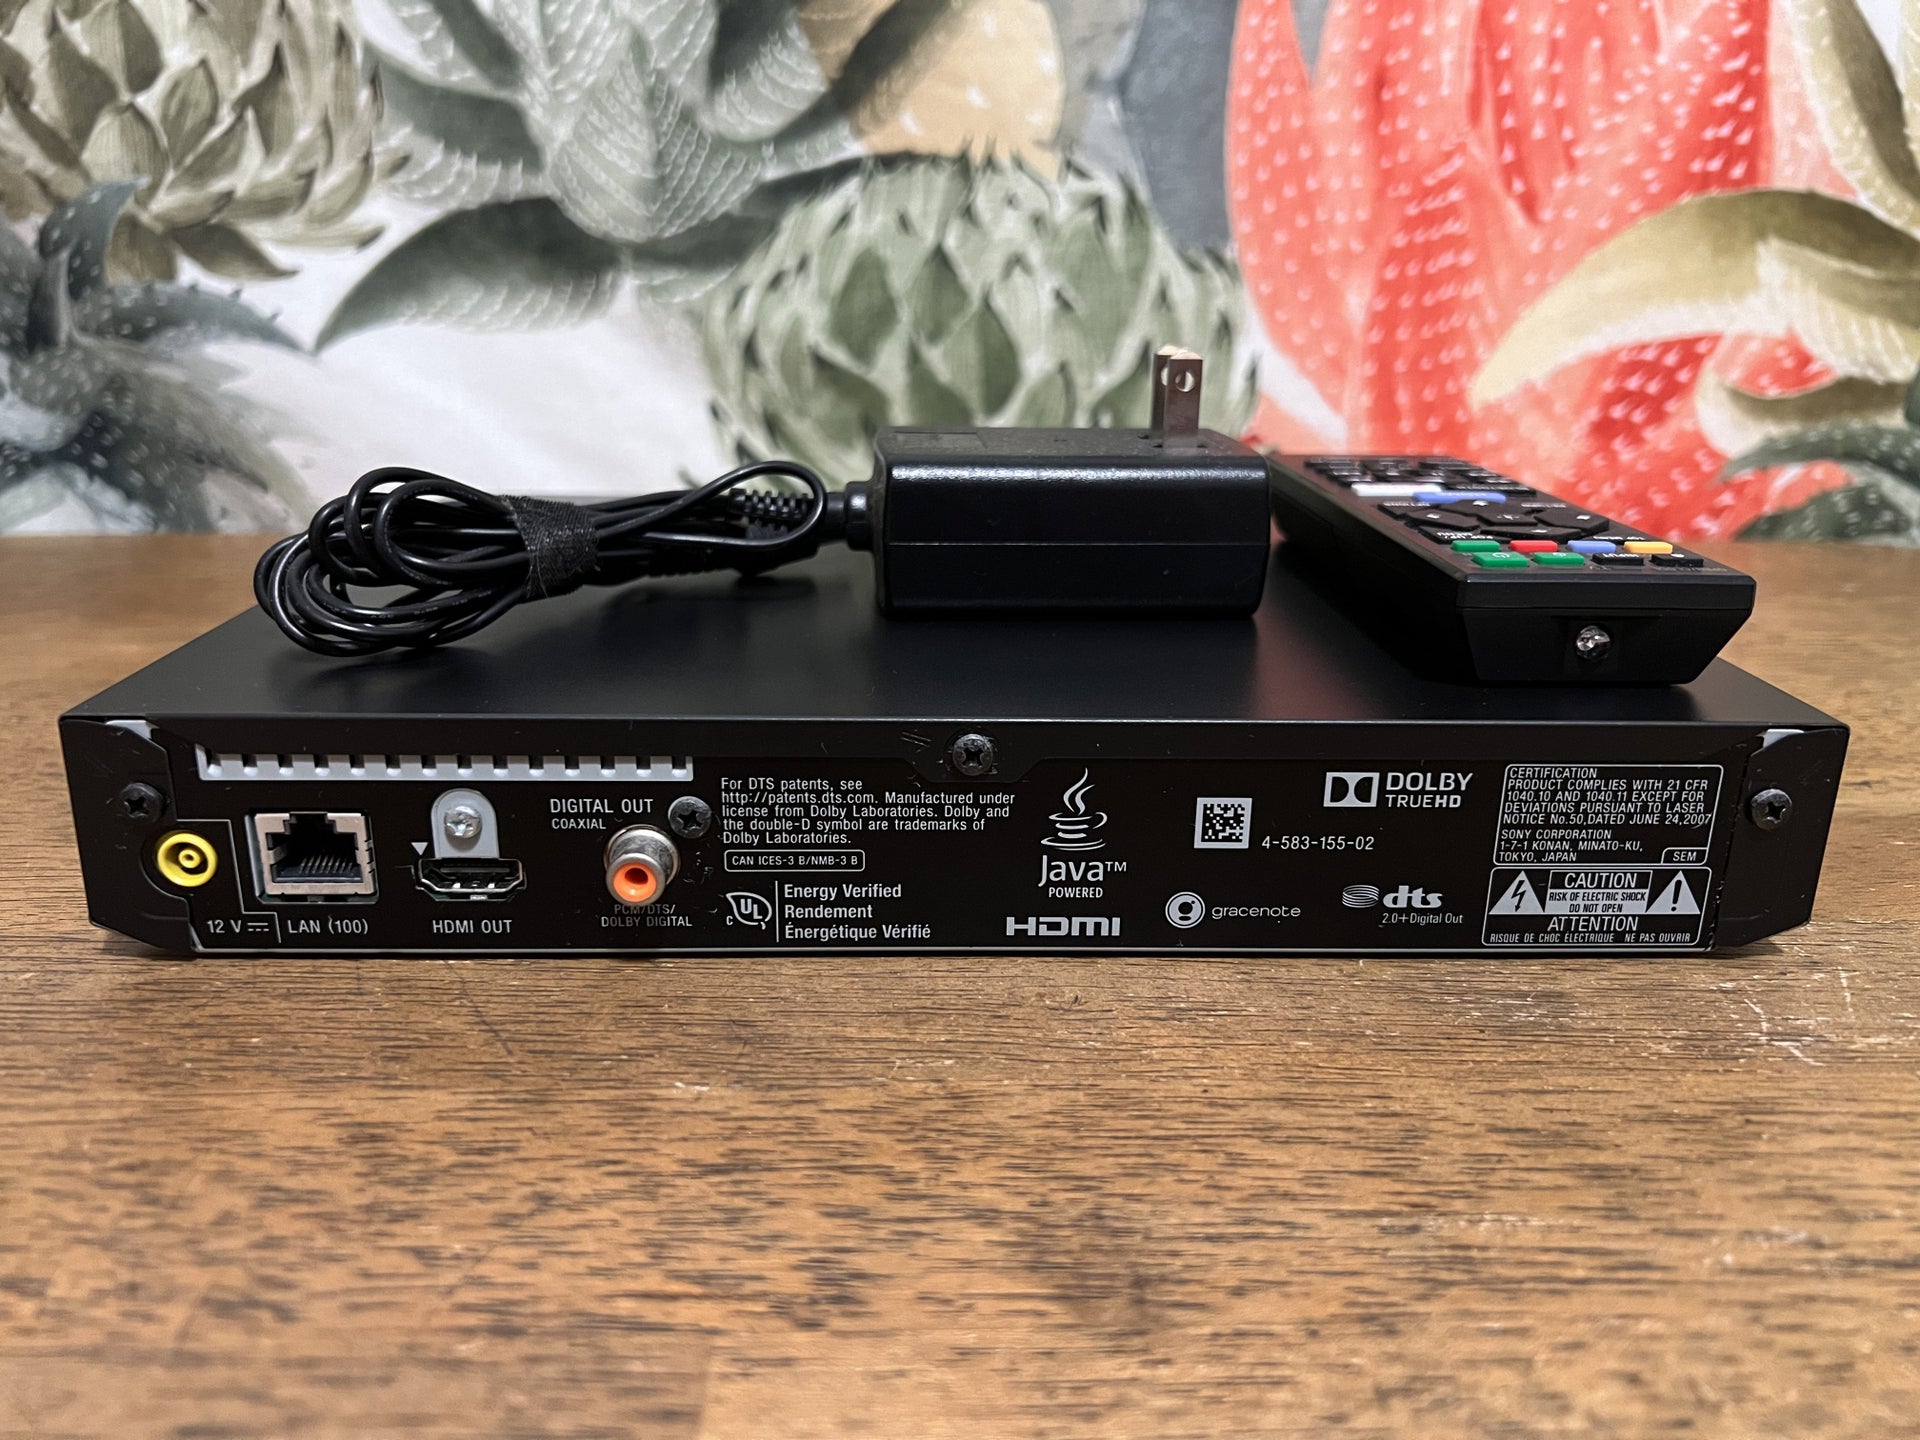 Sony BDP-S6700 Blu-ray Disc Player Reviewed - Future Audiophile